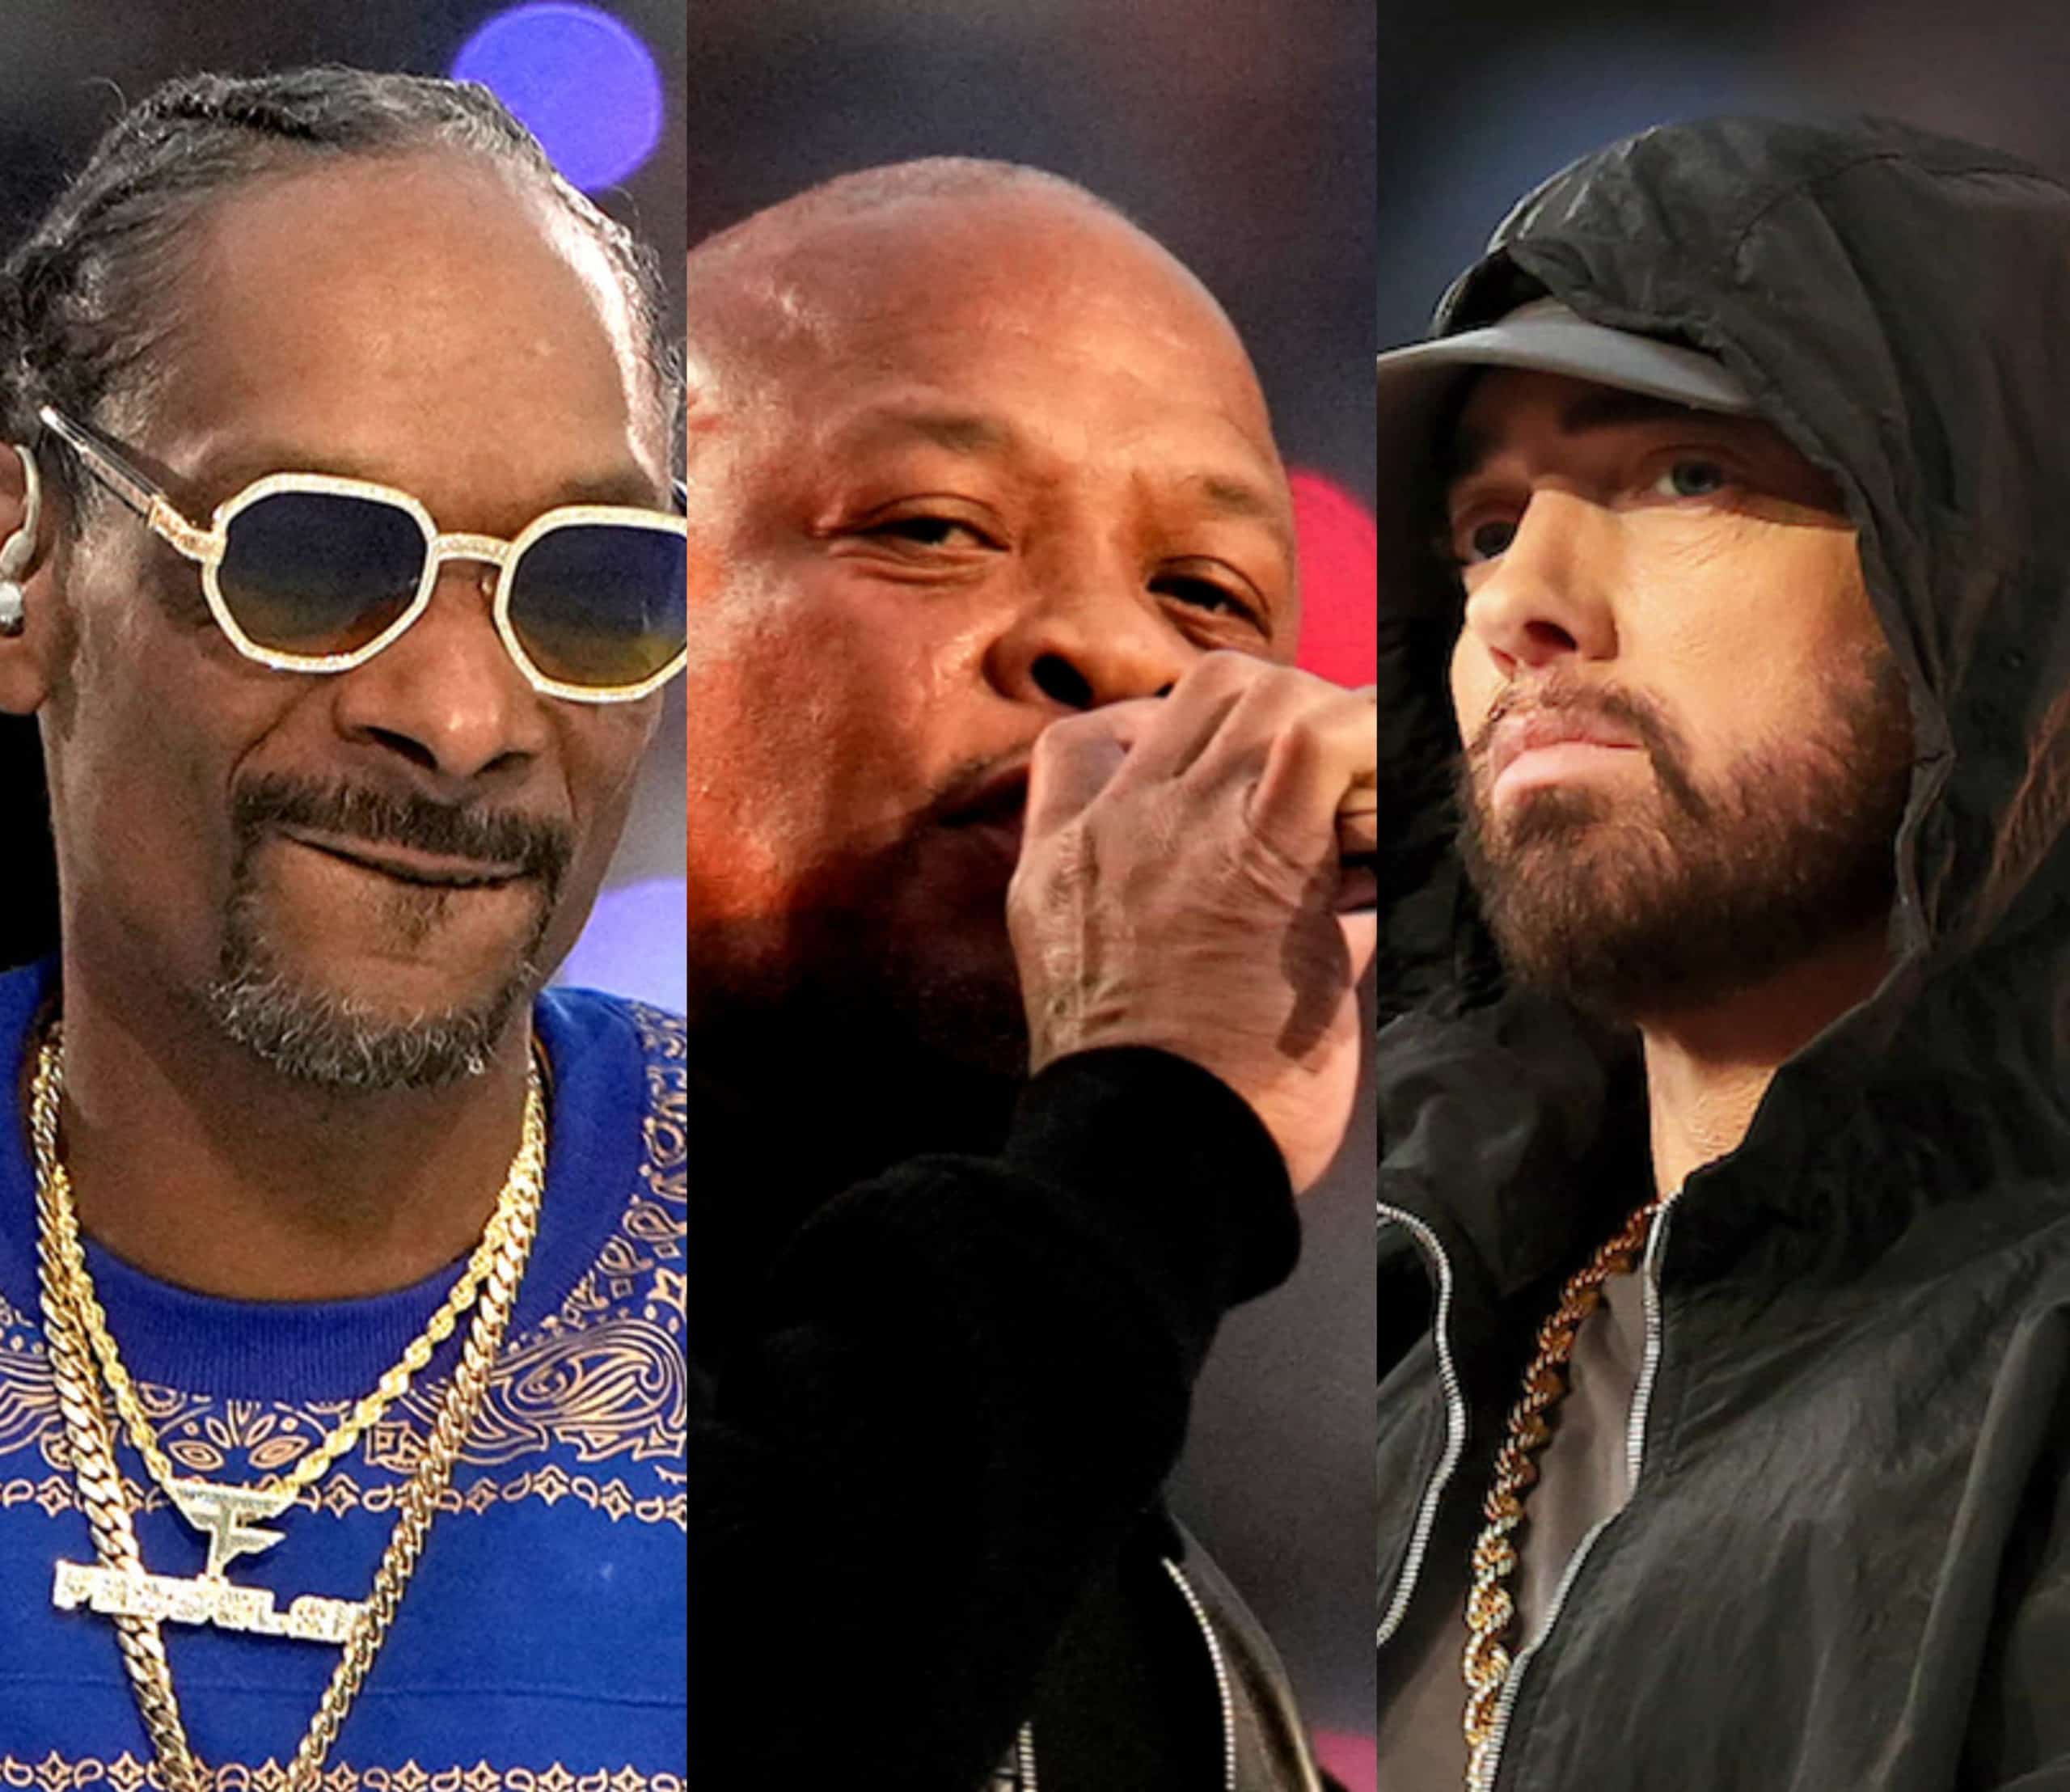 Dr. Dre & Snoop Dogg's The Next Episode & Eminem's Lose Yourself Reaches New Heights Following Super Bowl